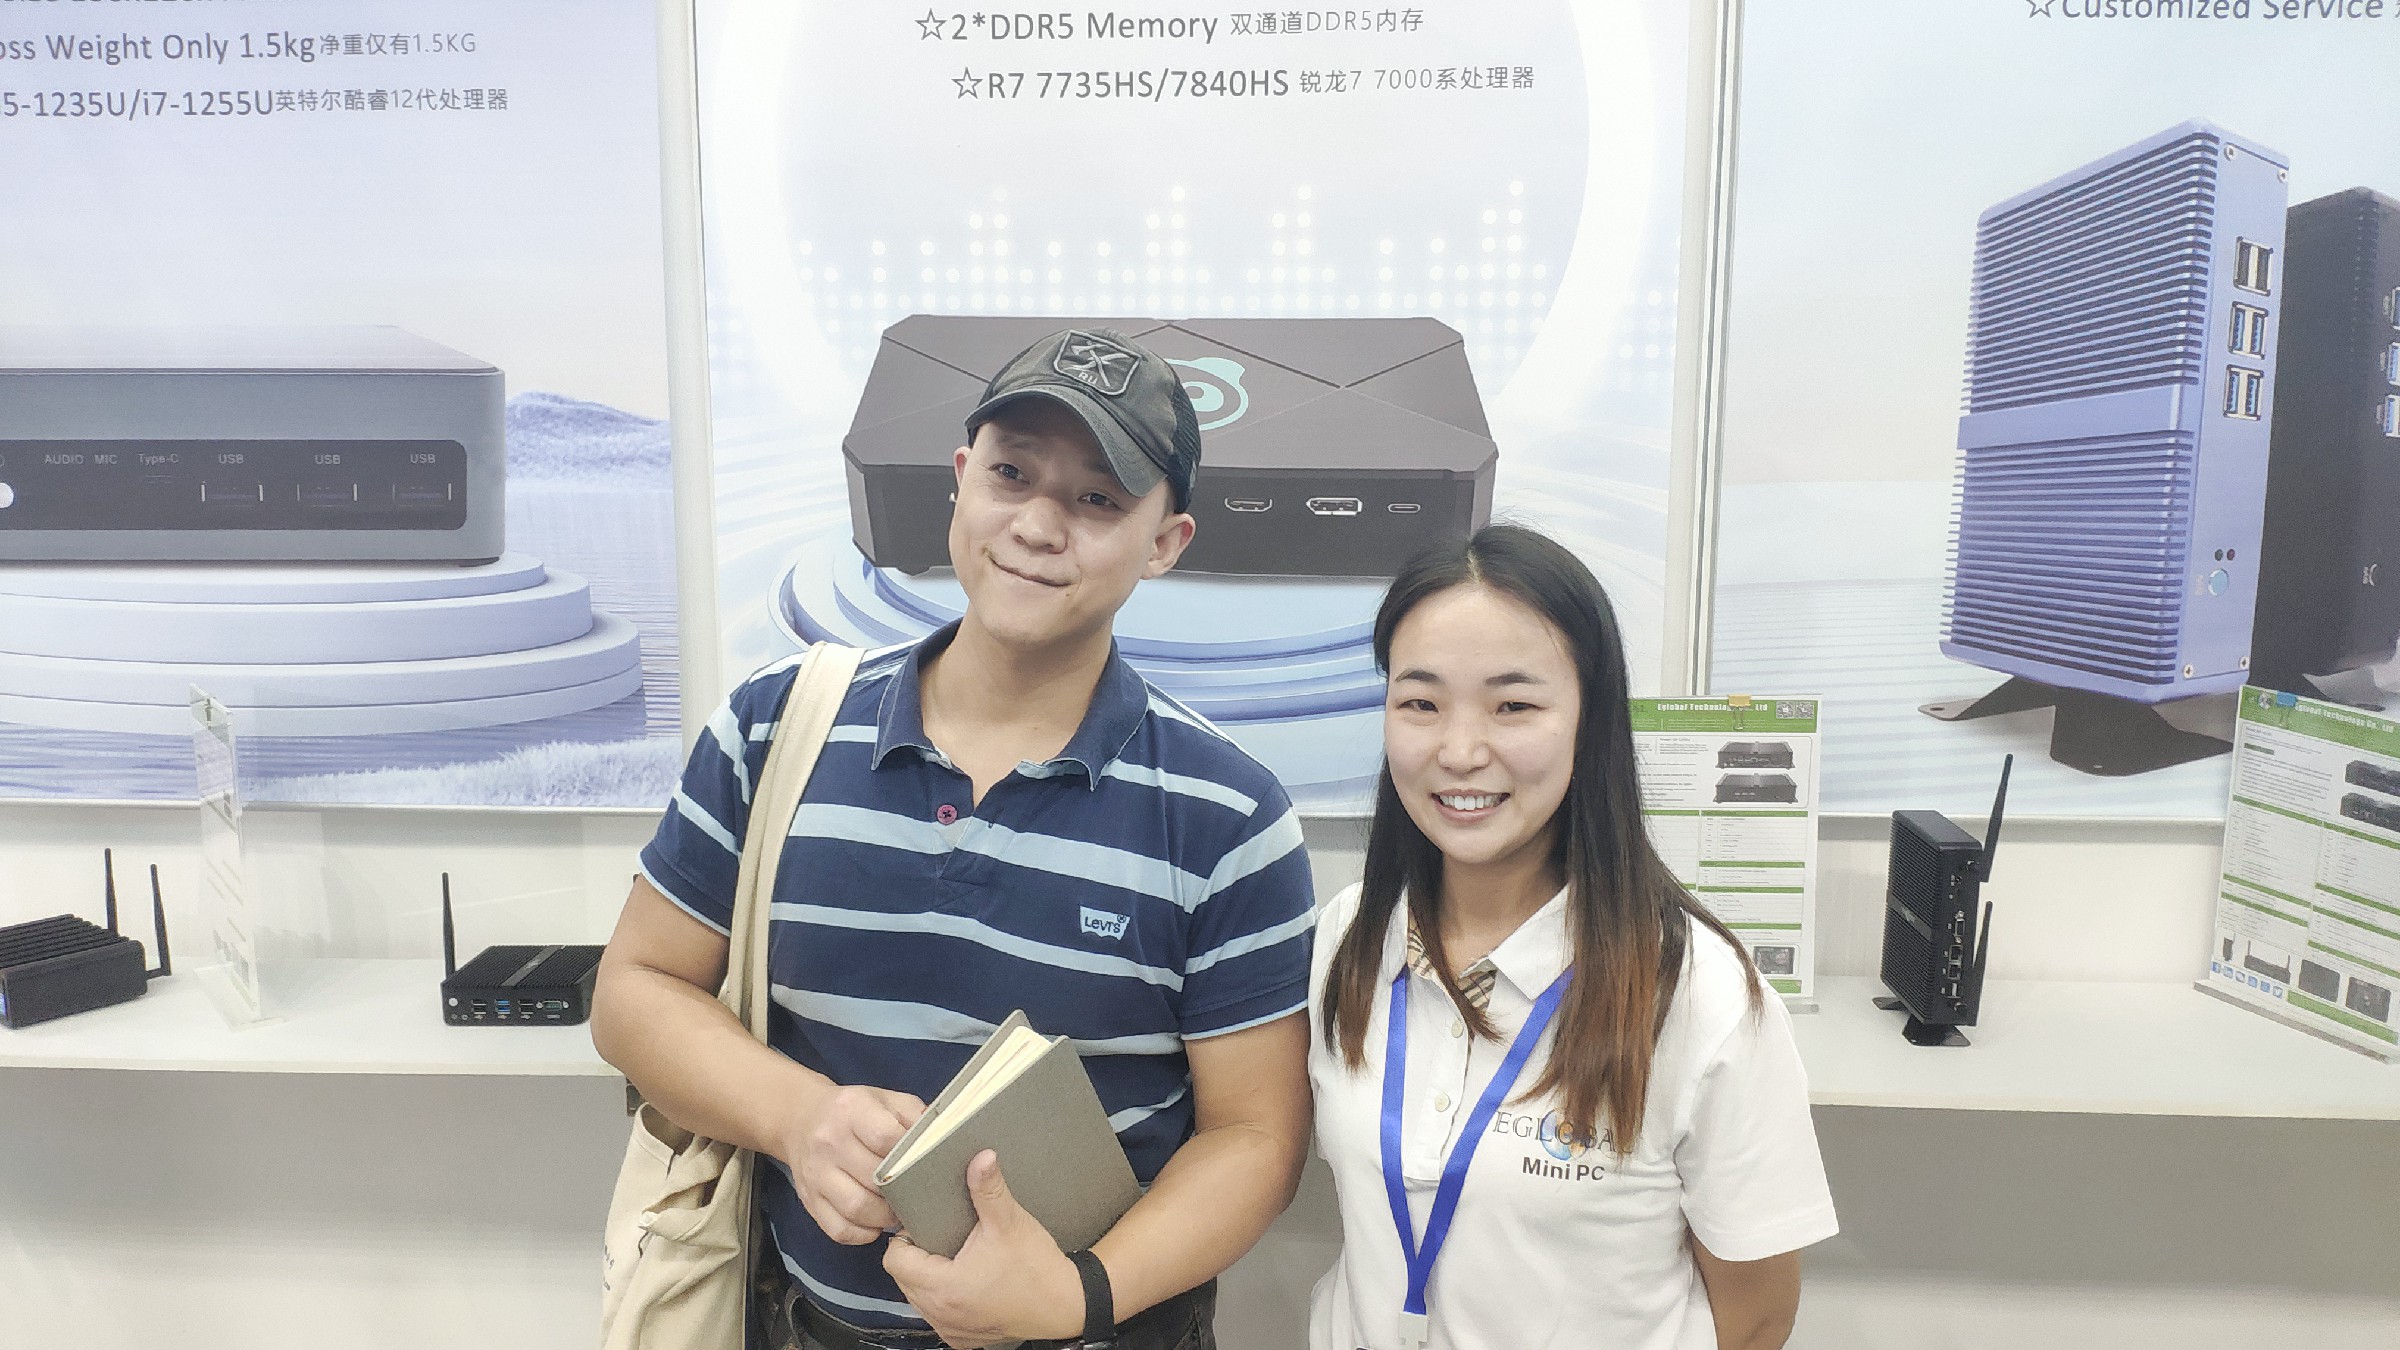 EGSMTPC Mini PC Manufacturer Attends 12.12 Foreign Trade Exhibition In Futian,Shenzhen(图3)